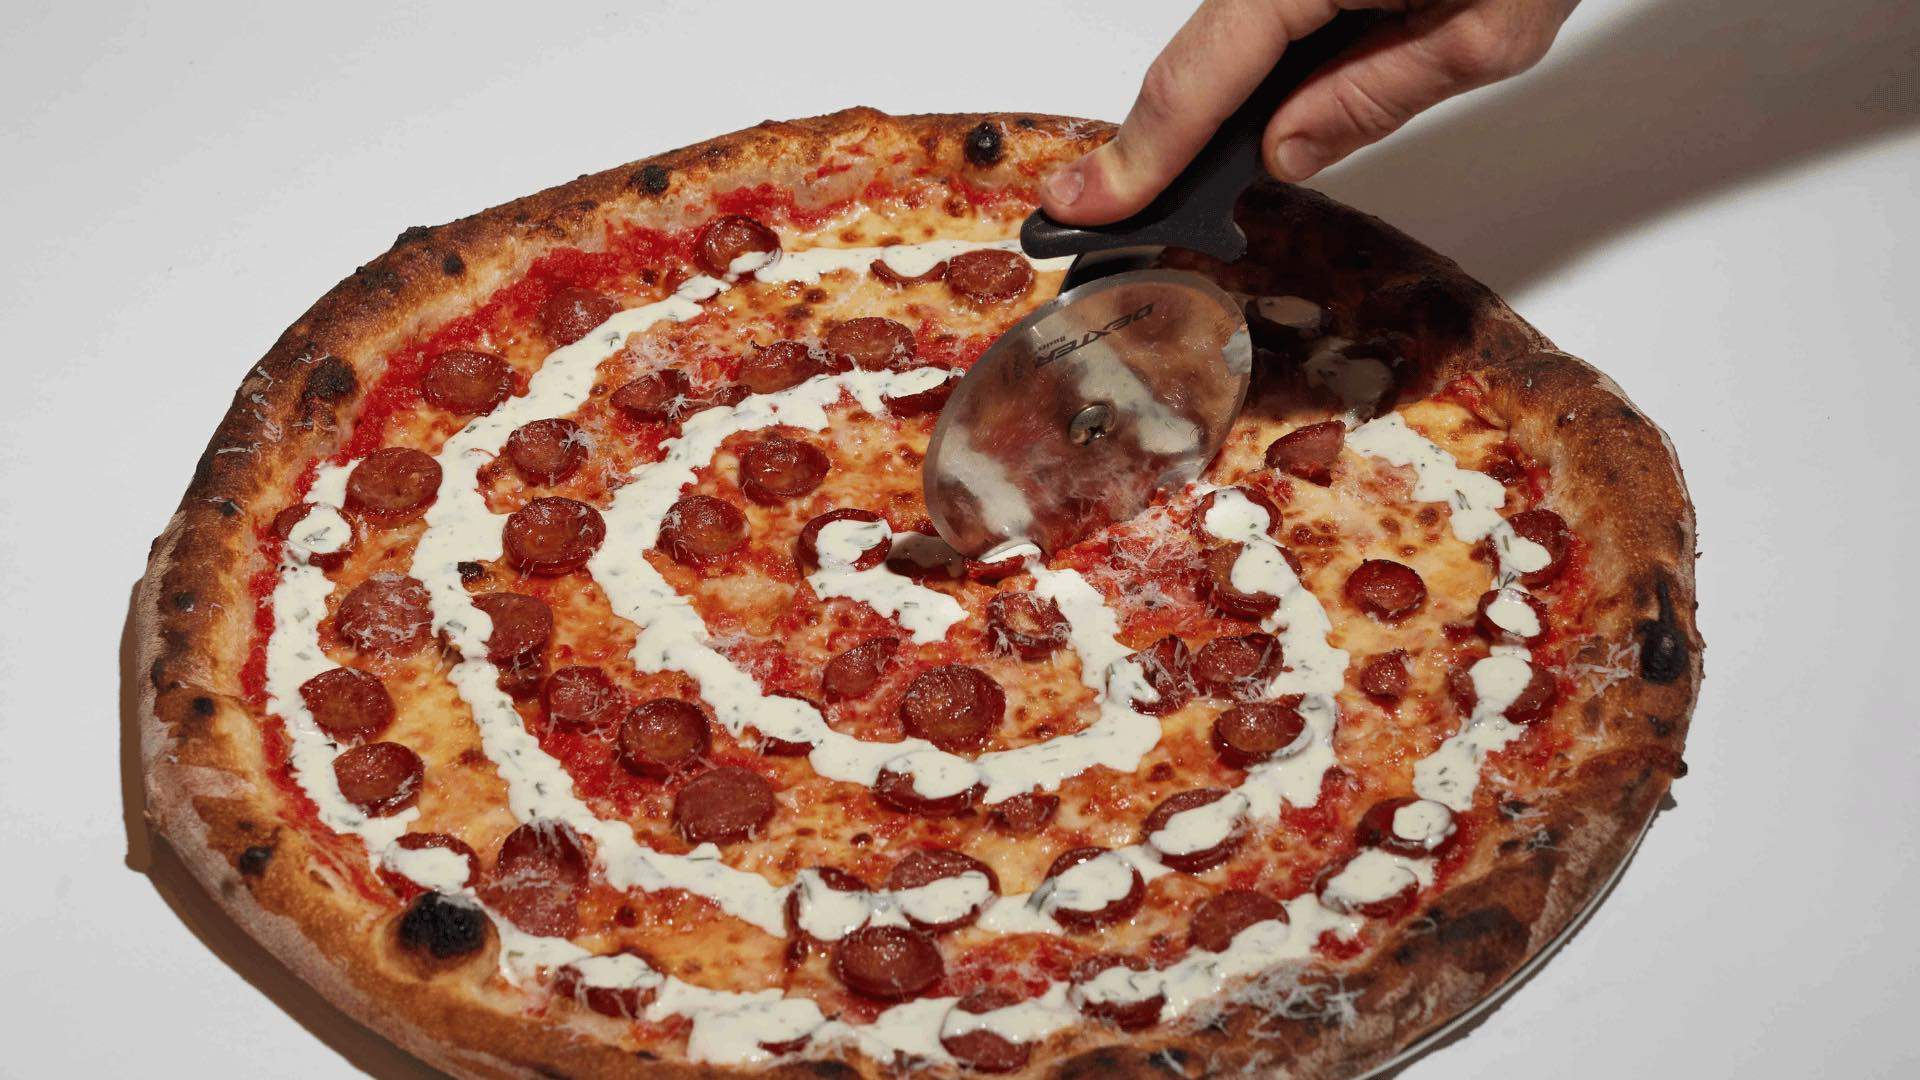 A large pizza with pepperoni from City Oltra.